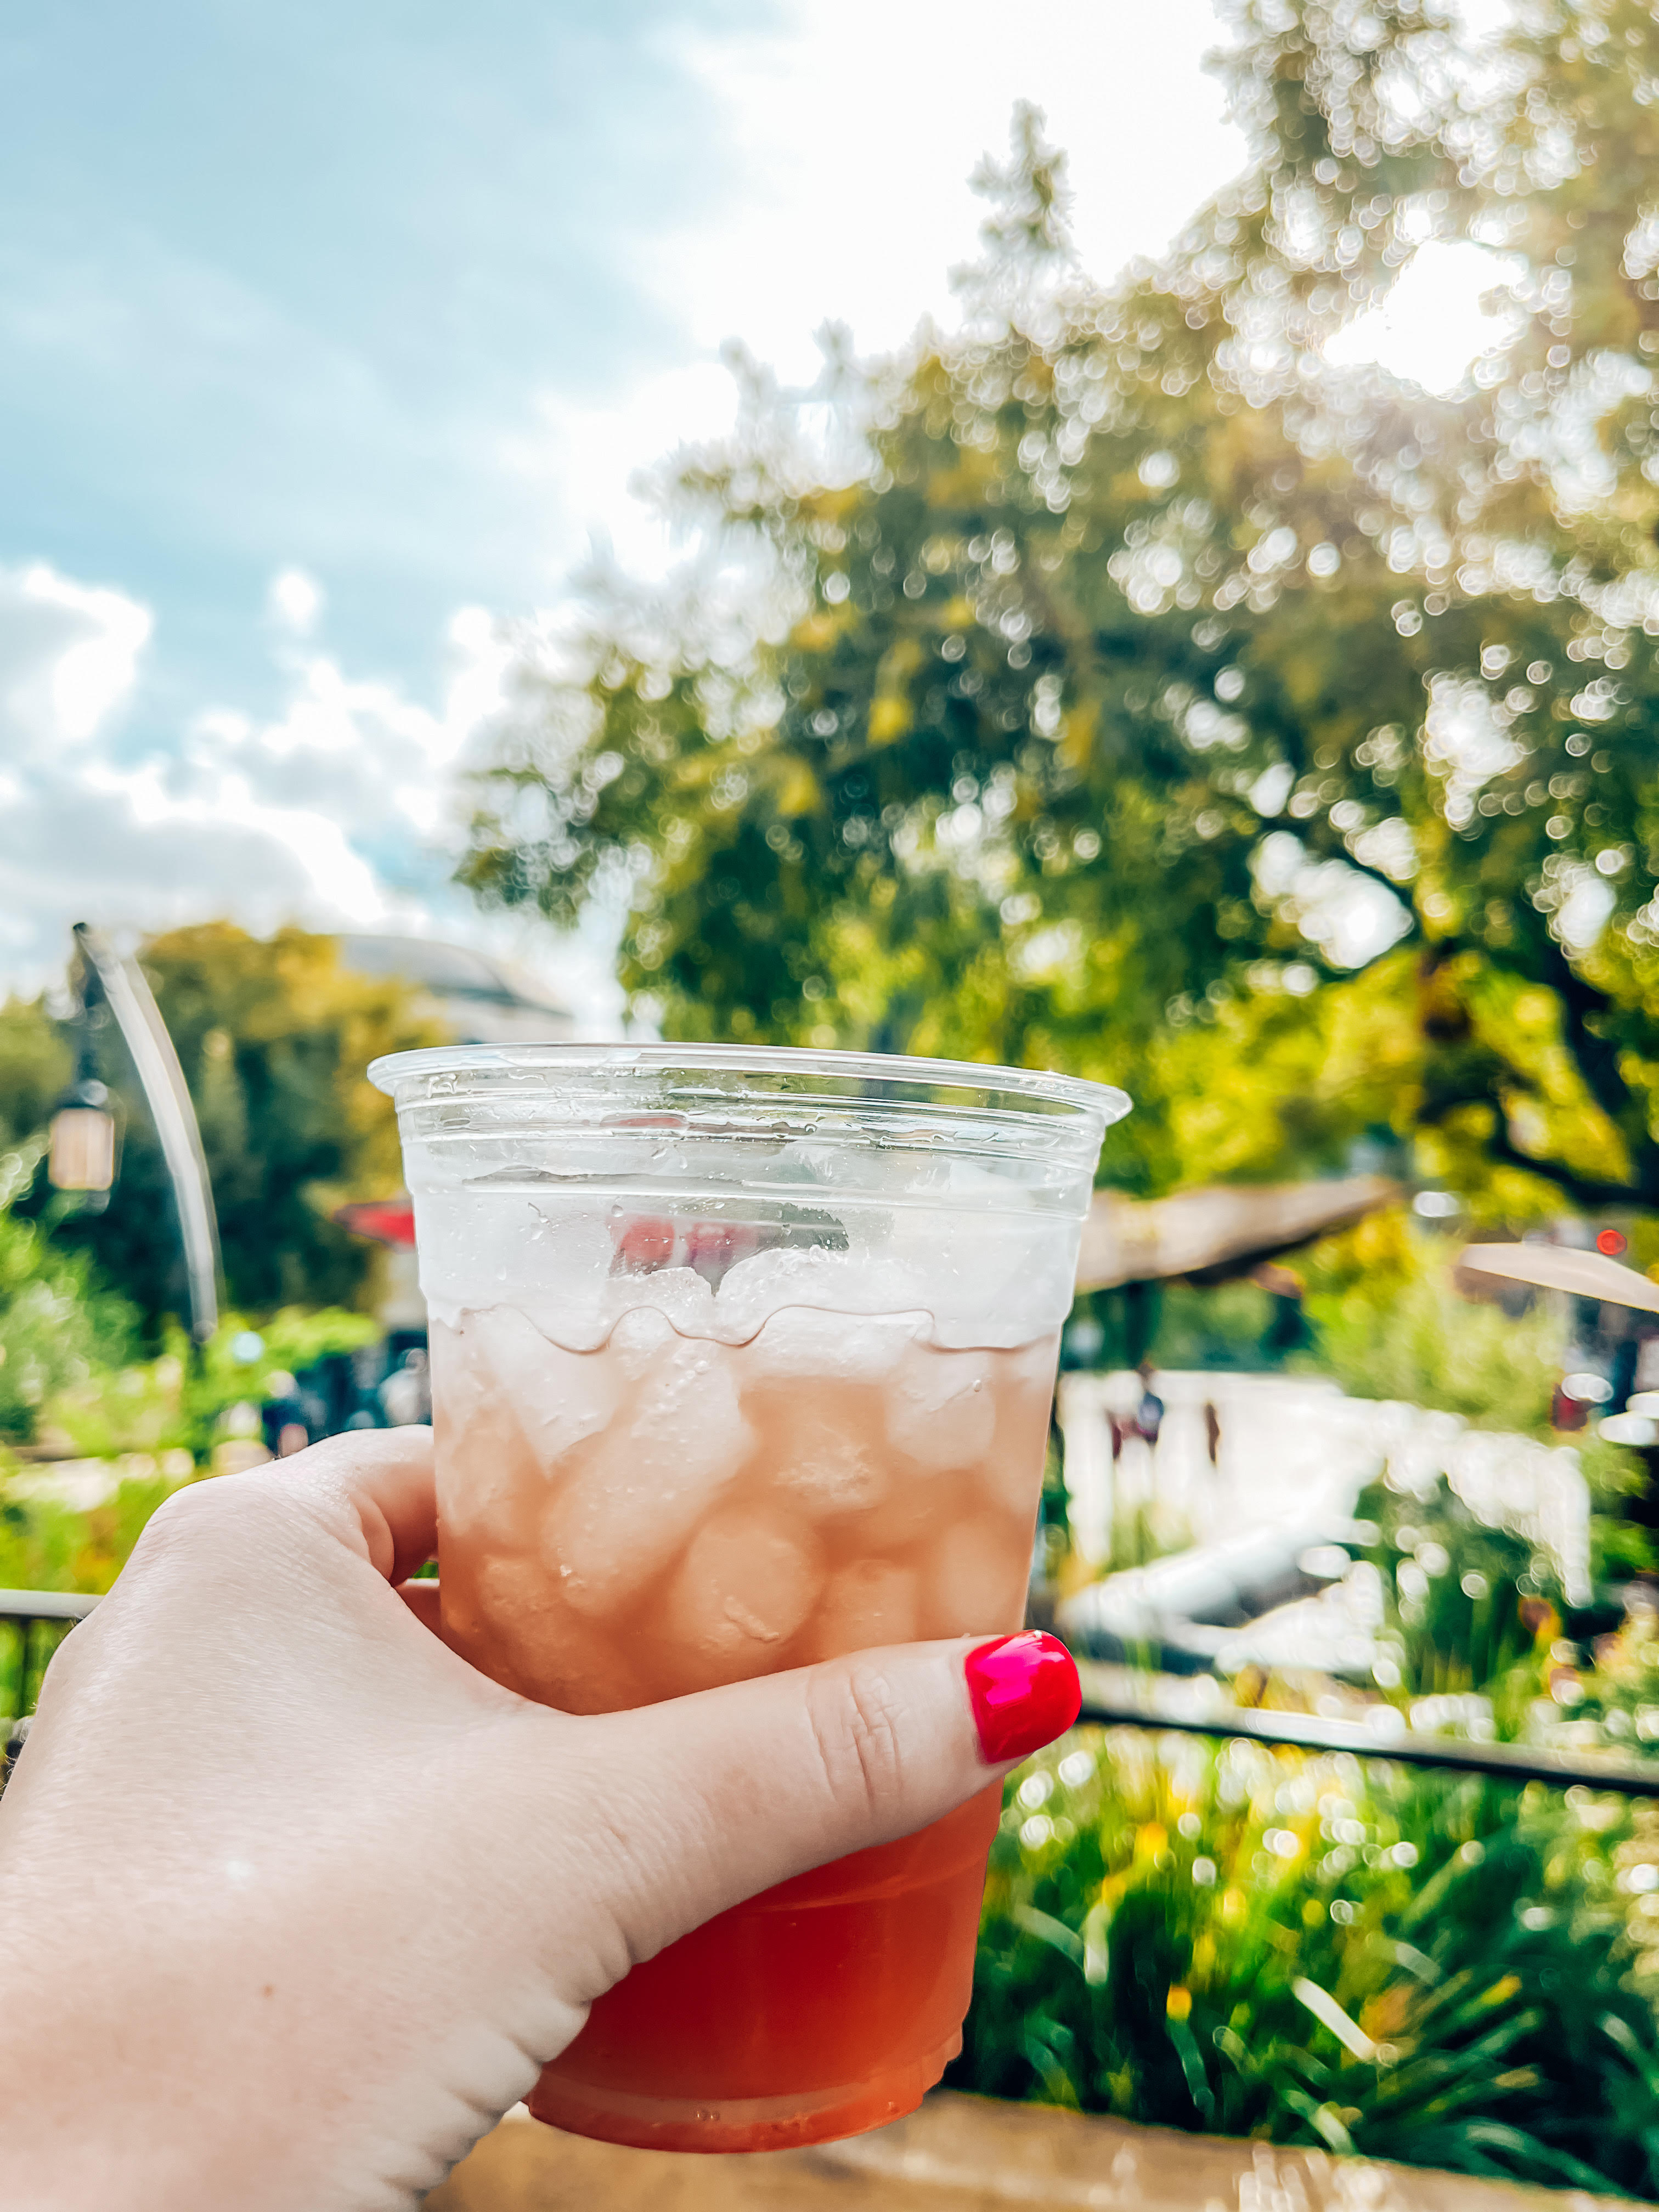 A hand with pink-painted nails holds a plastic cup filled with a reddish-orange iced beverage, known as a Tatooine Sunset, against a backdrop of lush greenery and a bright, sunny sky. The scene captures a refreshing moment in a picturesque outdoor setting.